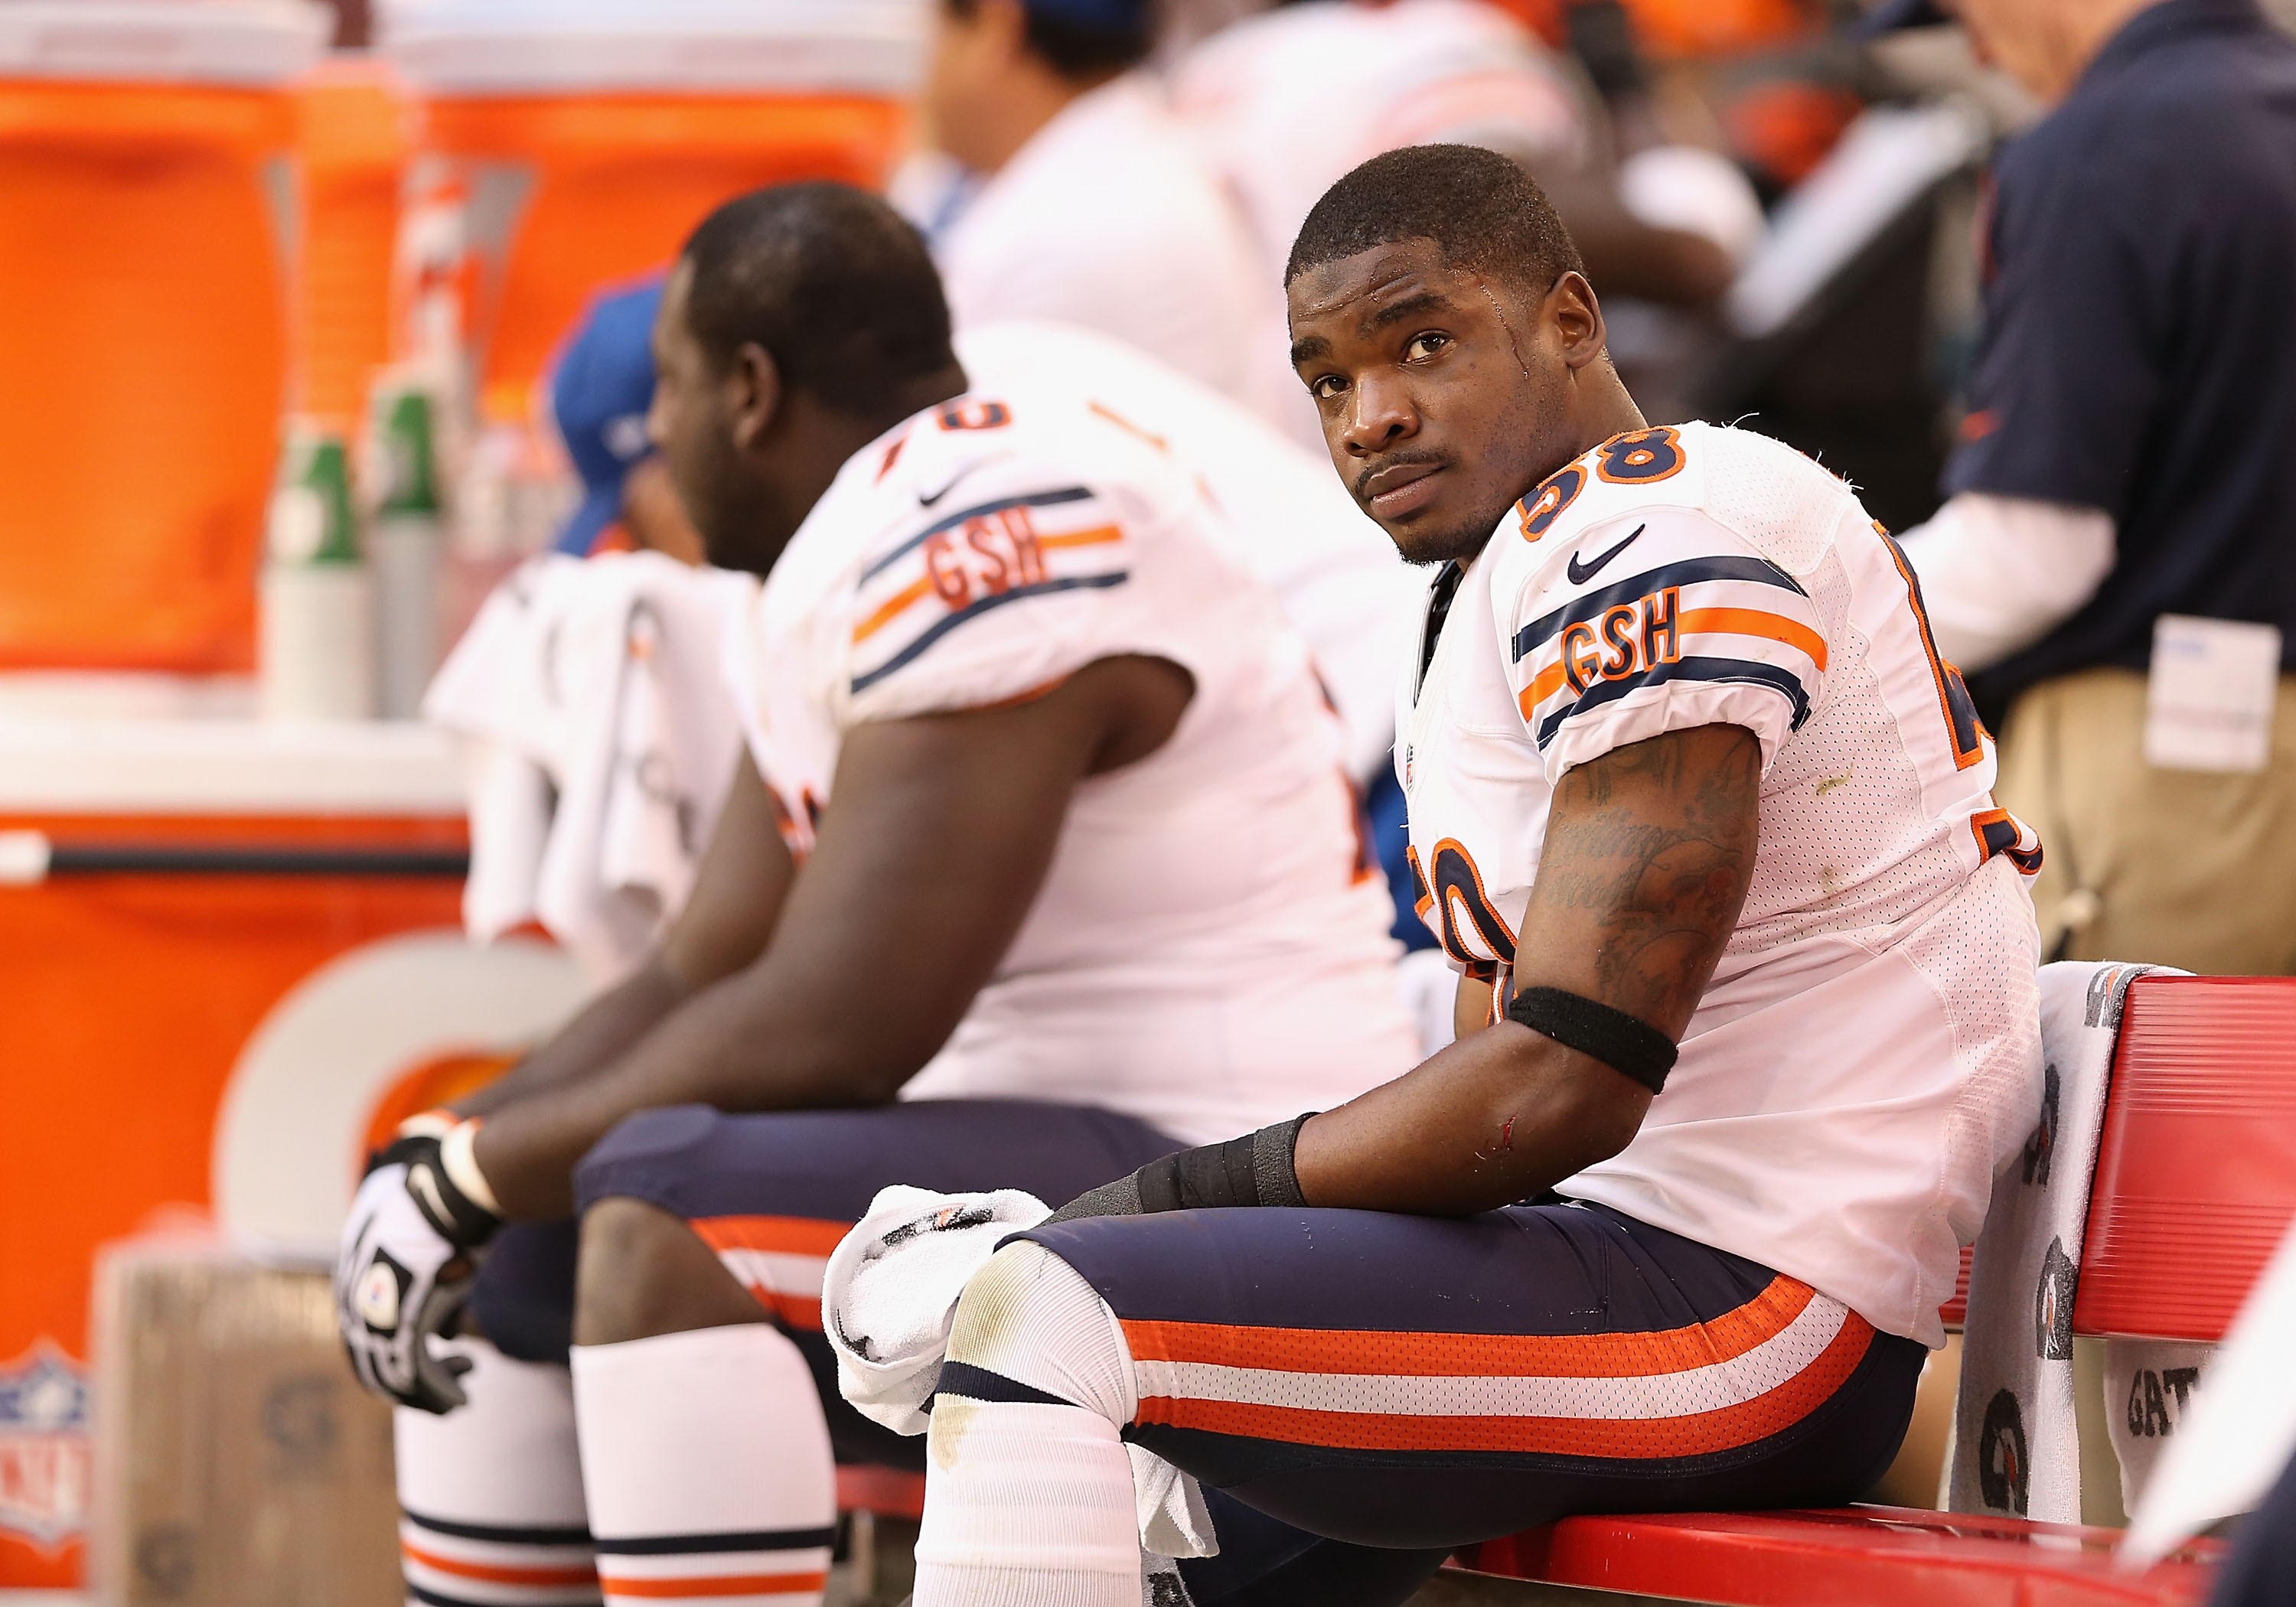 GLENDALE, AZ - DECEMBER 23:  Outside linebacker Geno Hayes #58 of the Chicago Bears on the bench during the NFL game against the Arizona Cardinals at the University of Phoenix Stadium on December 23, 2012 in Glendale, Arizona.  The Bears defeated the Card (Foto: Getty Images)